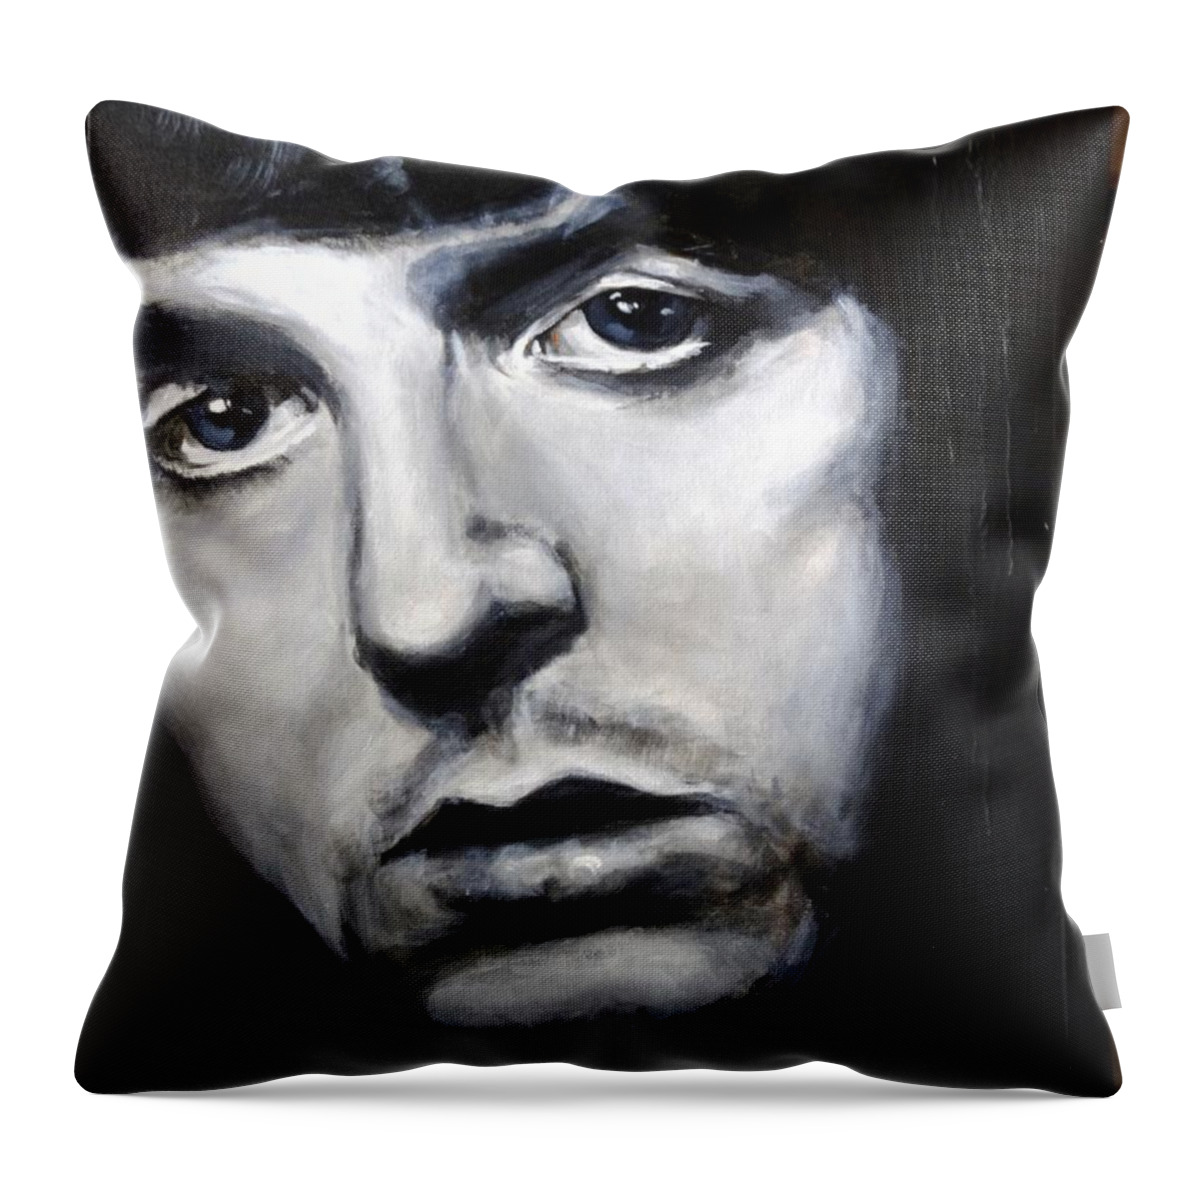 Celebrity Portrait Paul Mccartney During The Beatles Era. Throw Pillow featuring the painting Sir Paul McCartney by Eric Dee